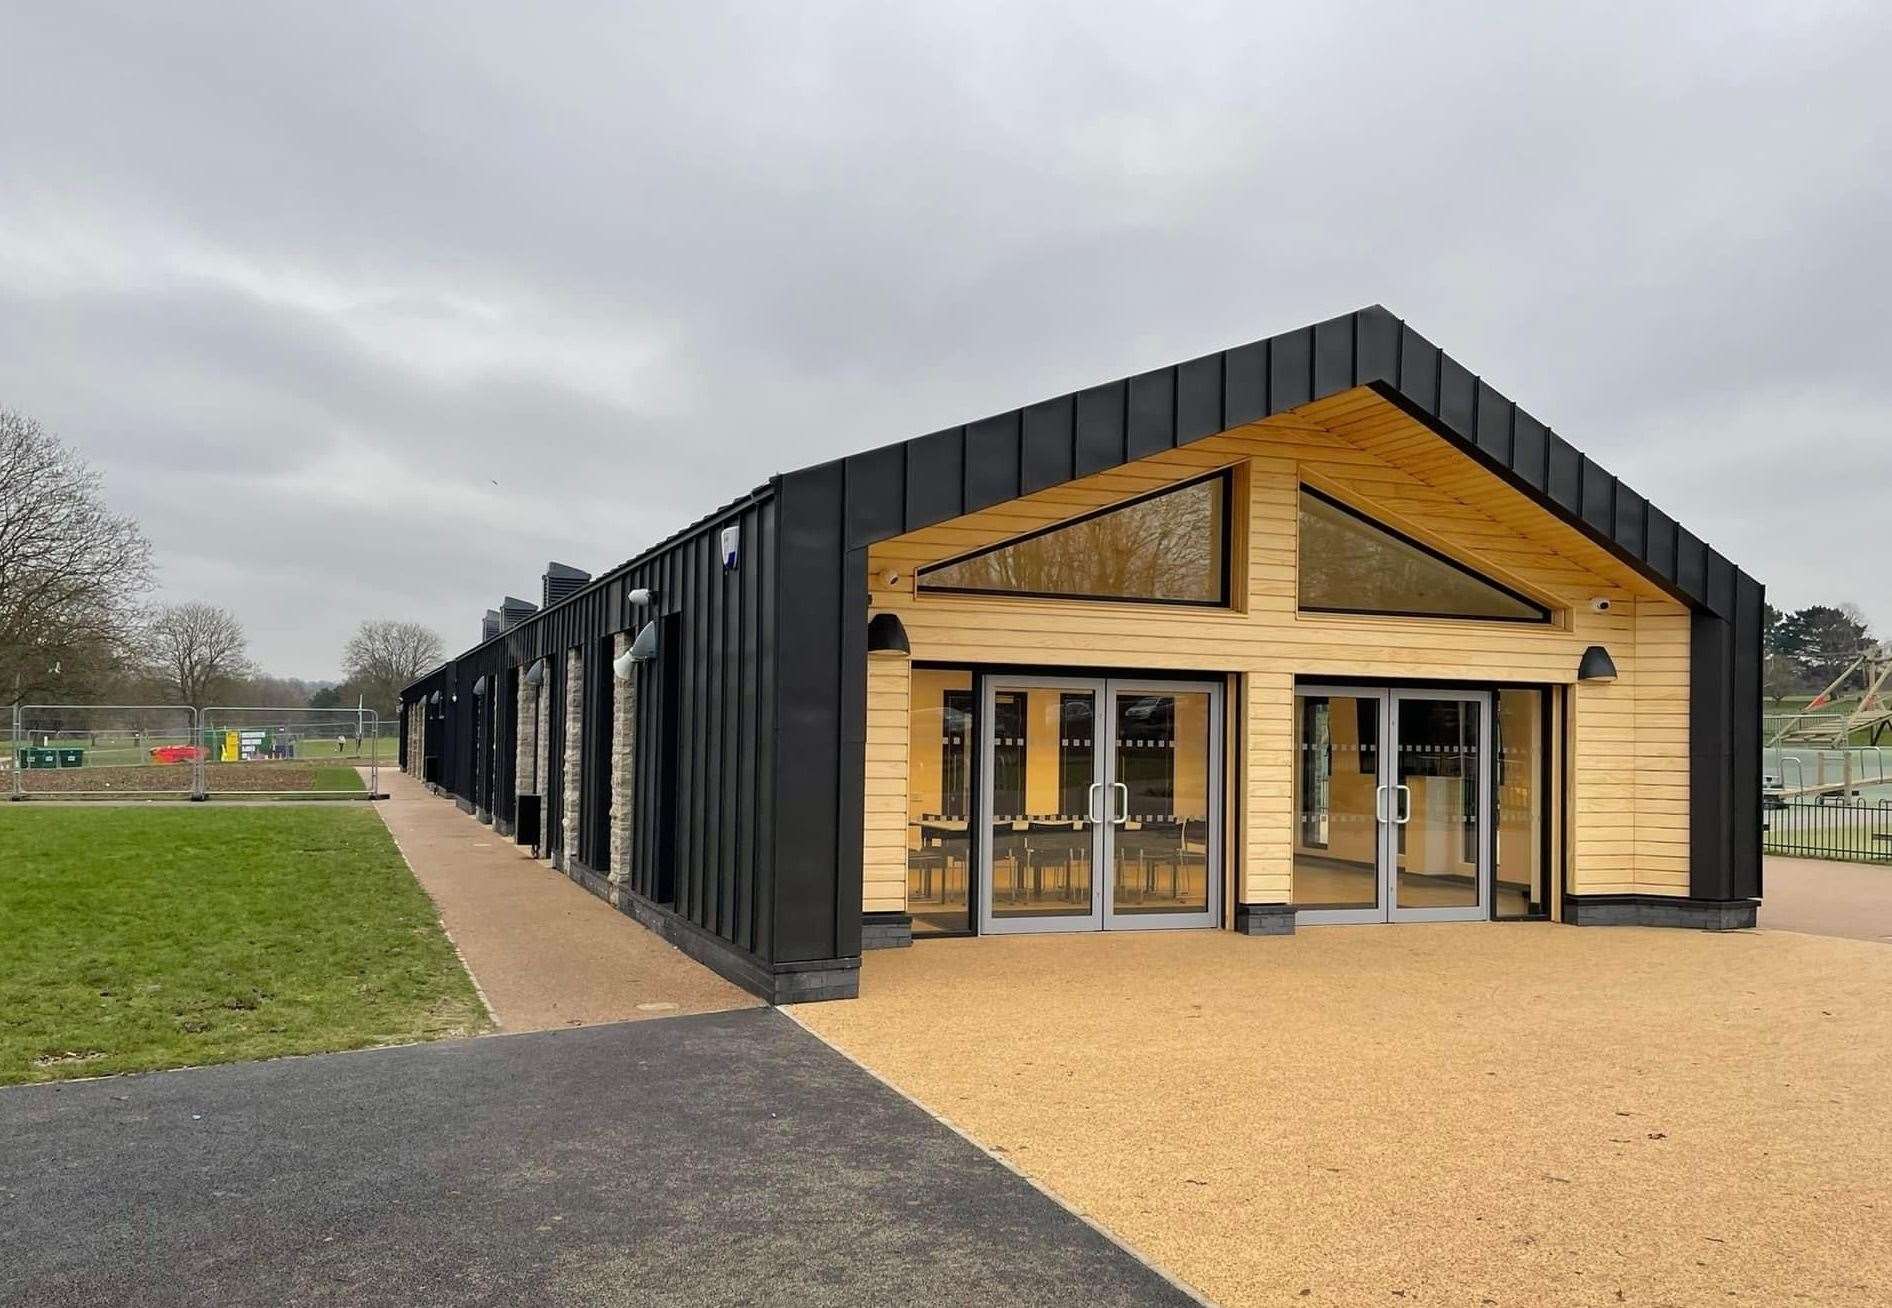 The Mote Park cafe in Maidstone is set to open in the Spring. Picture: Matt Lilley